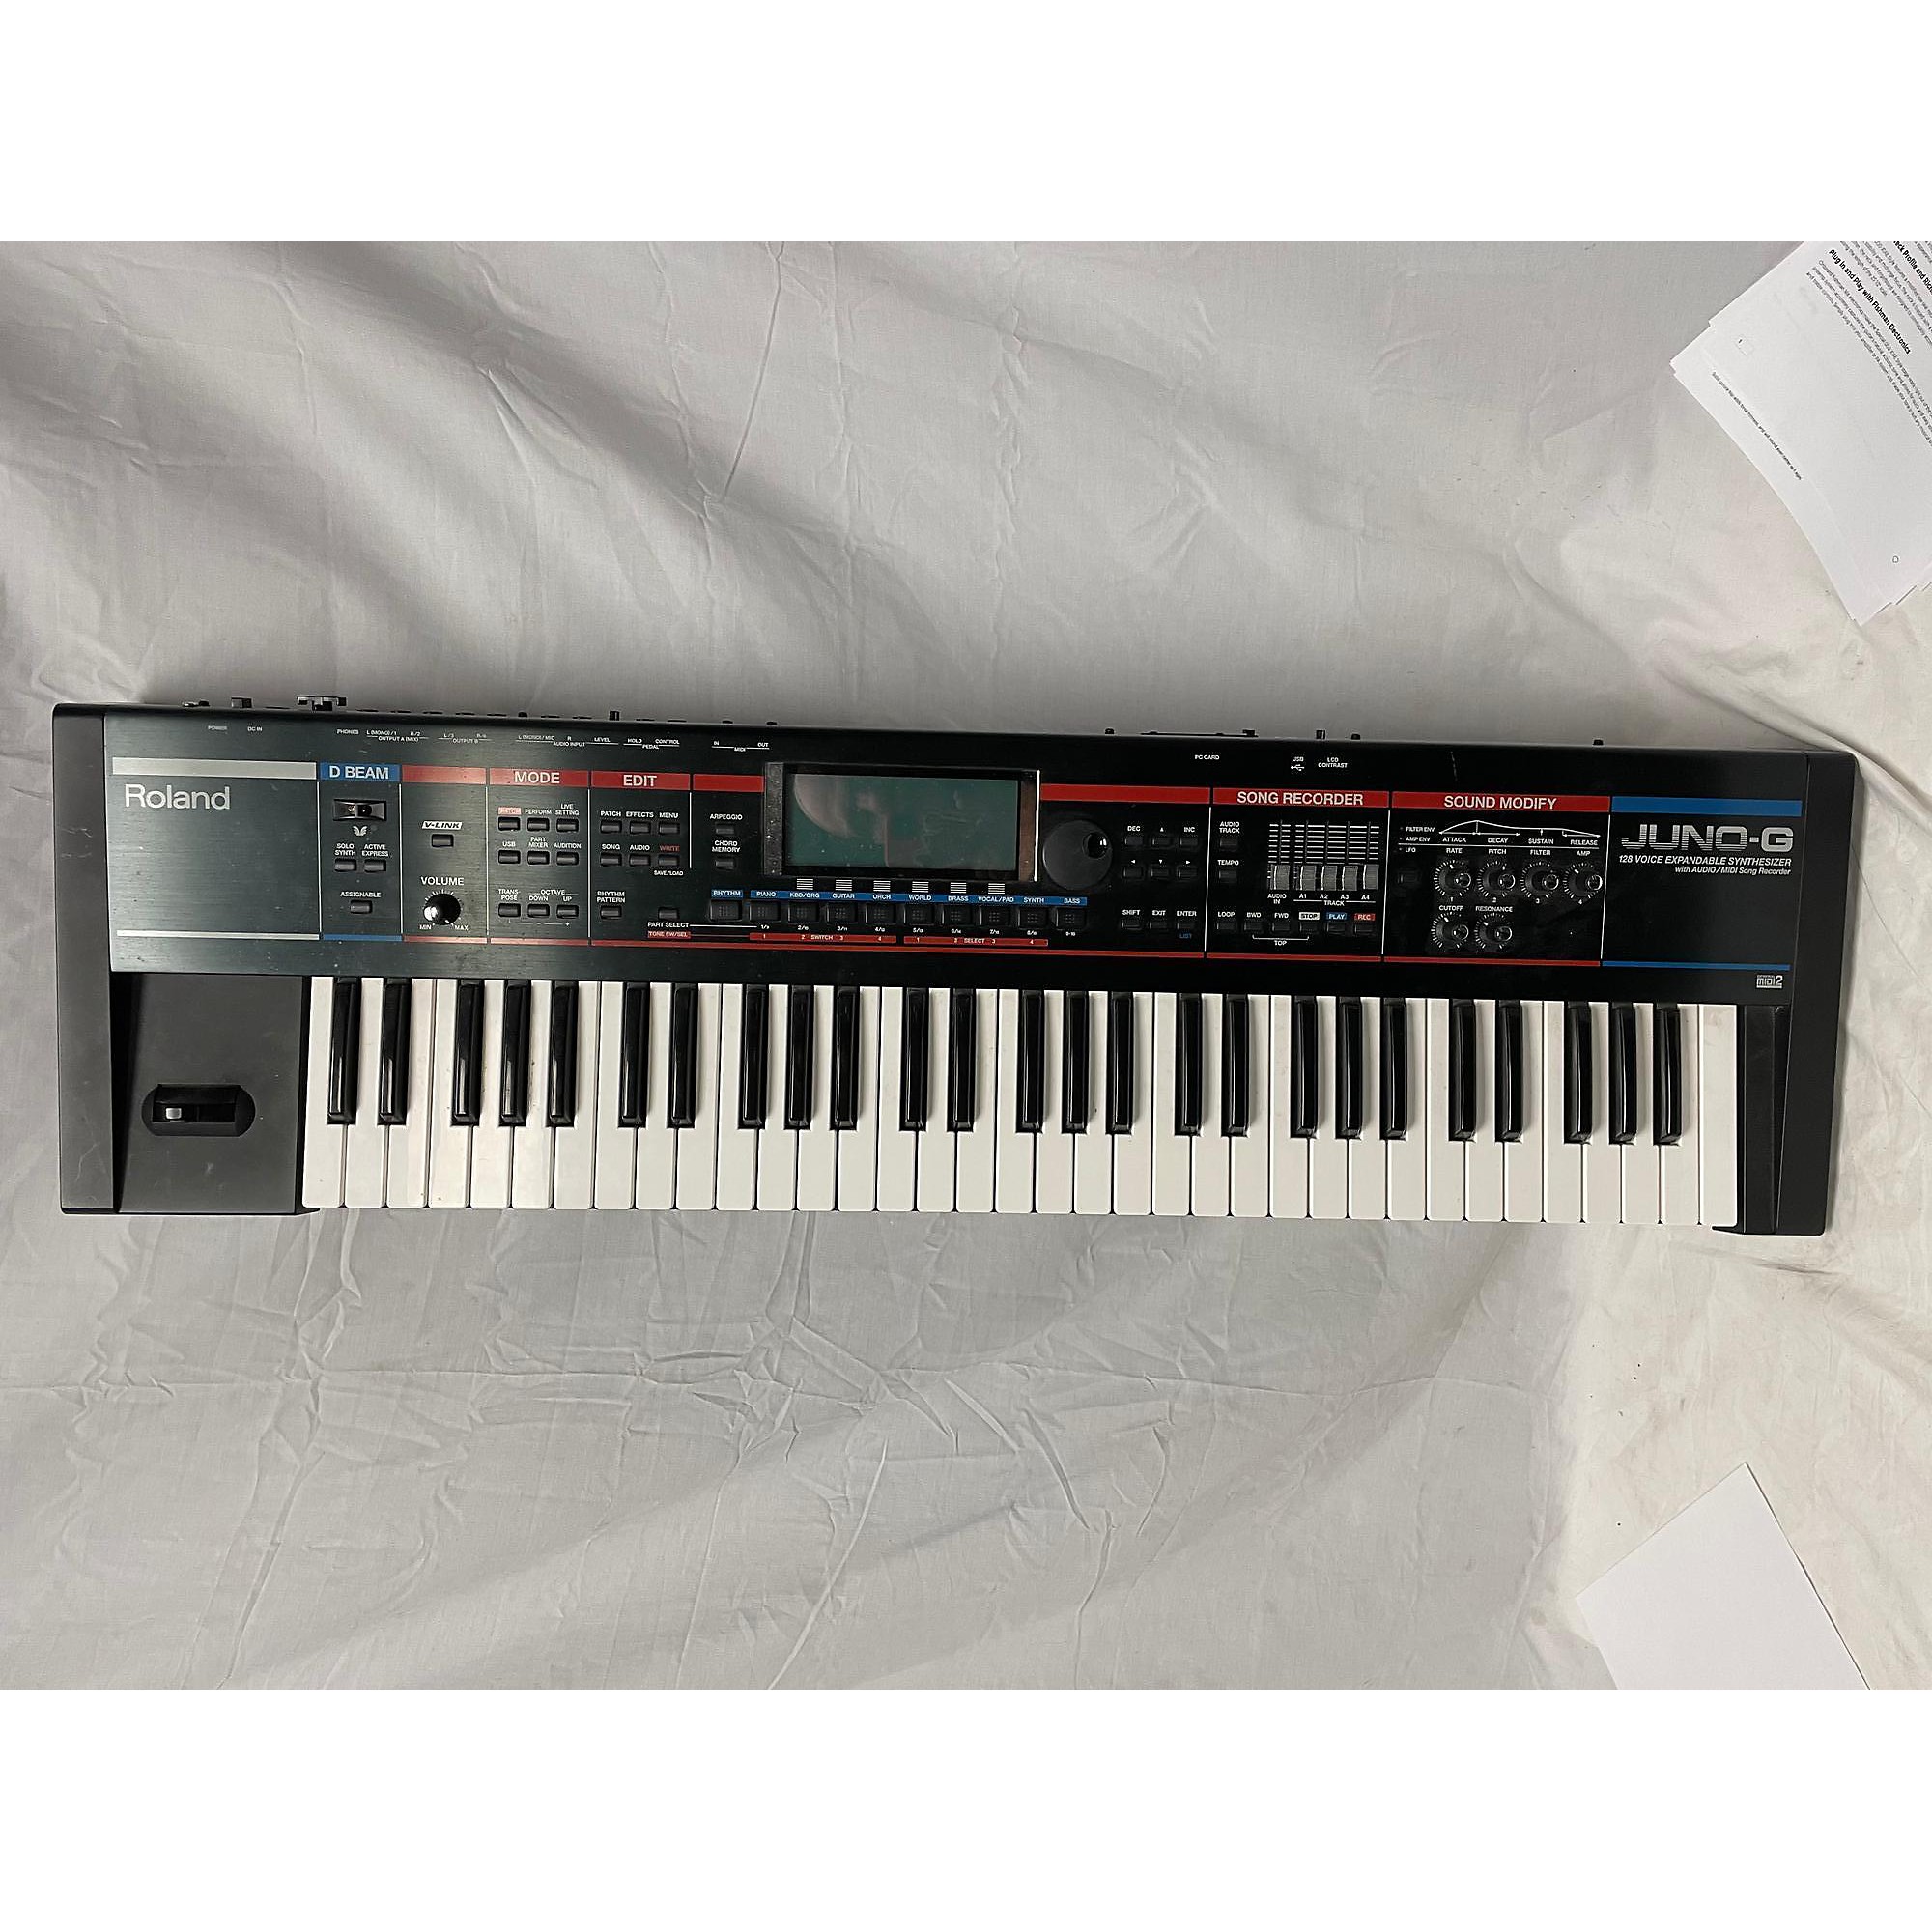 Used Roland Juno G Synthesizer | Guitar Center